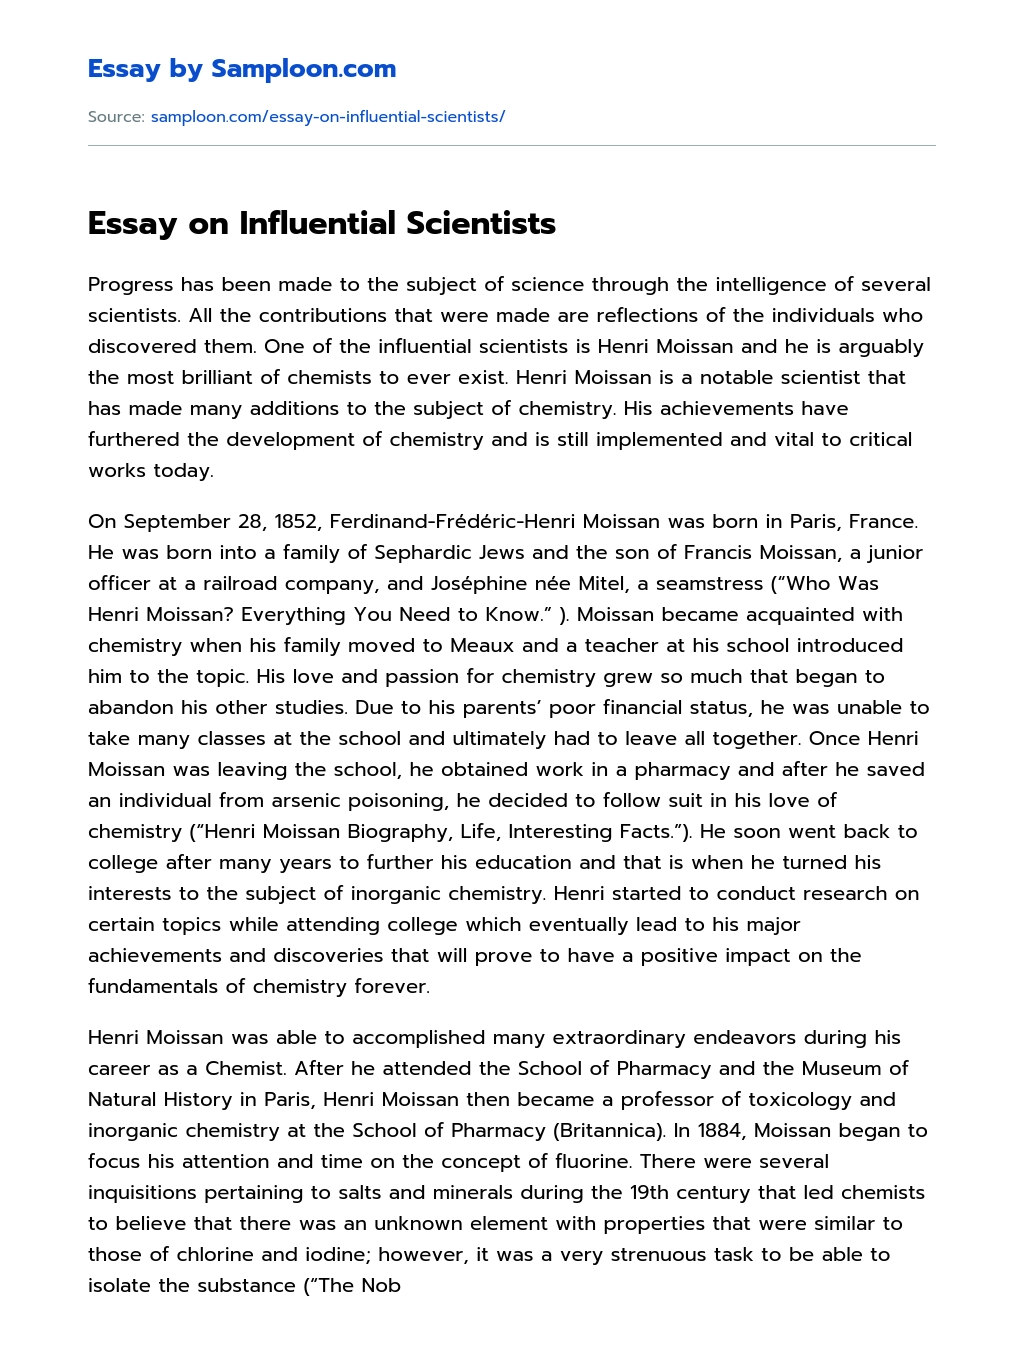 Essay on Influential Scientists essay